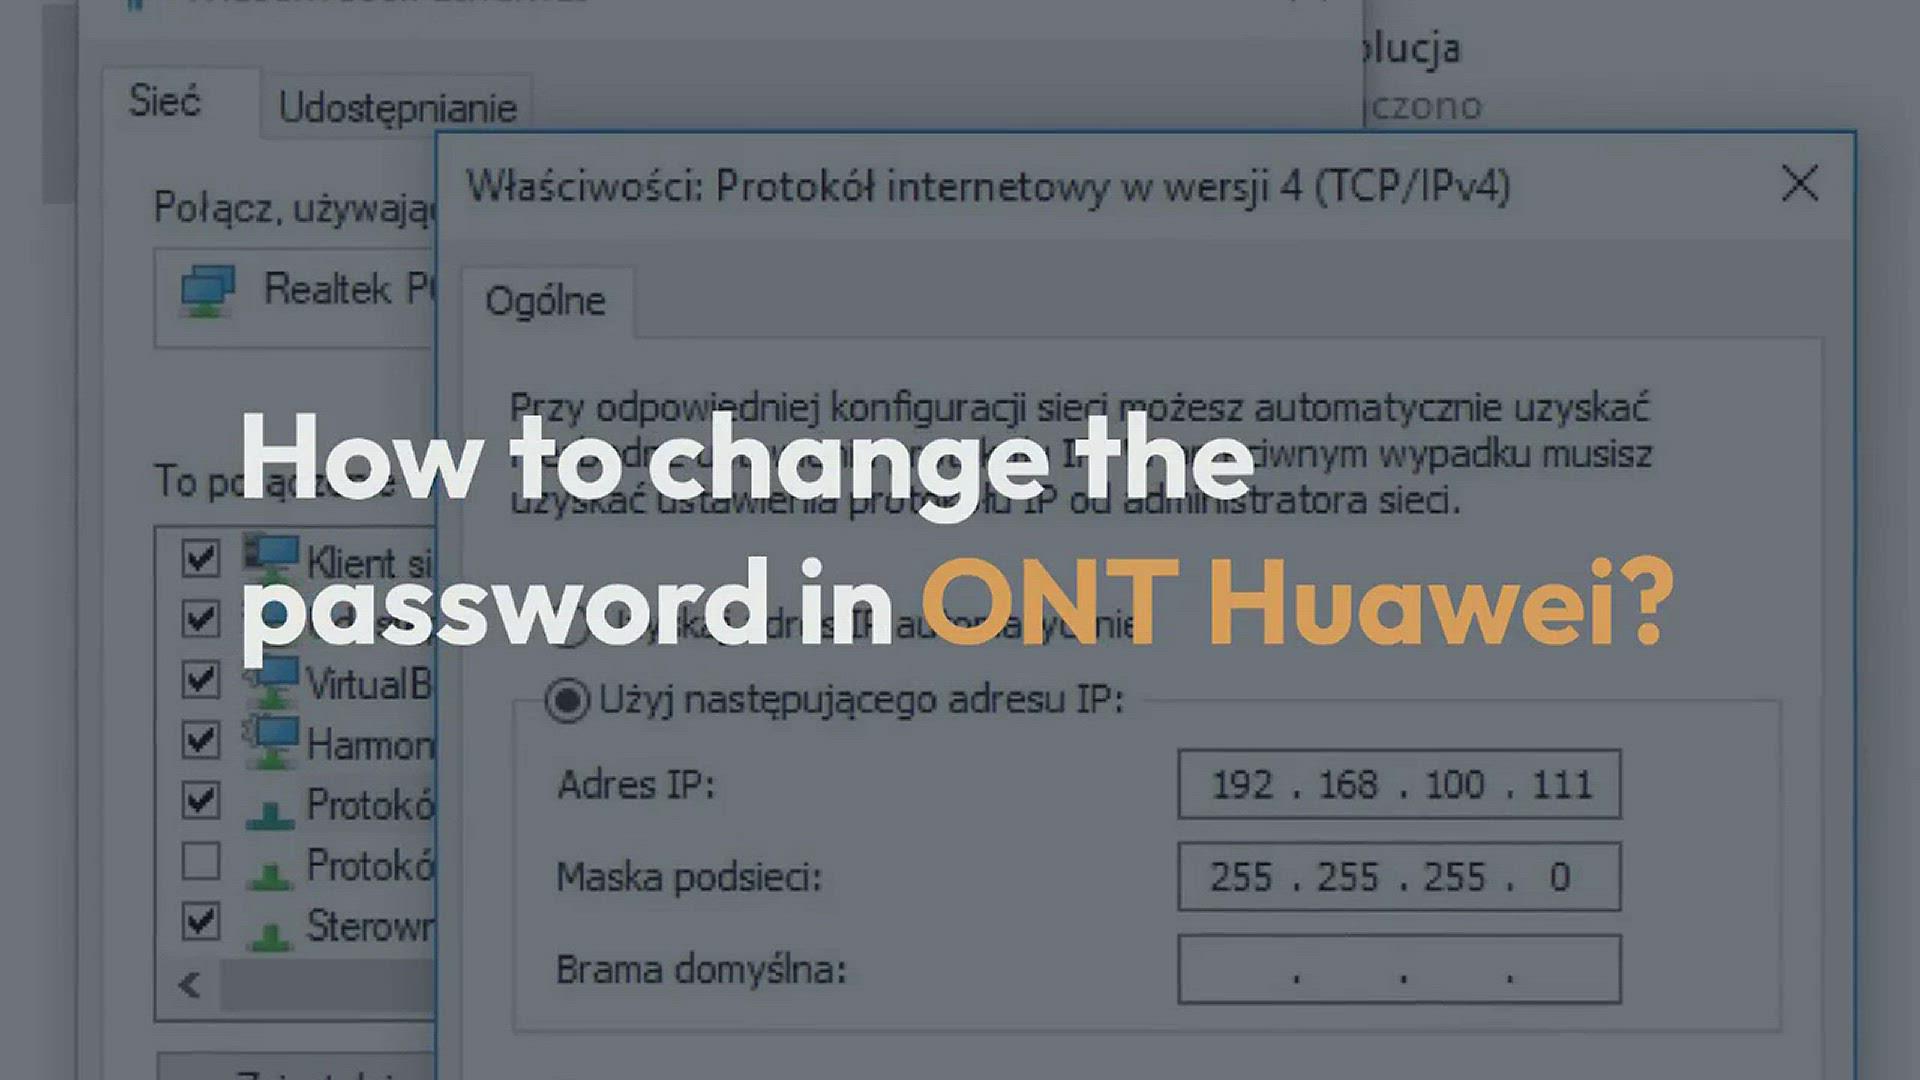 'Video thumbnail for How to change the password in ONT Huawei'